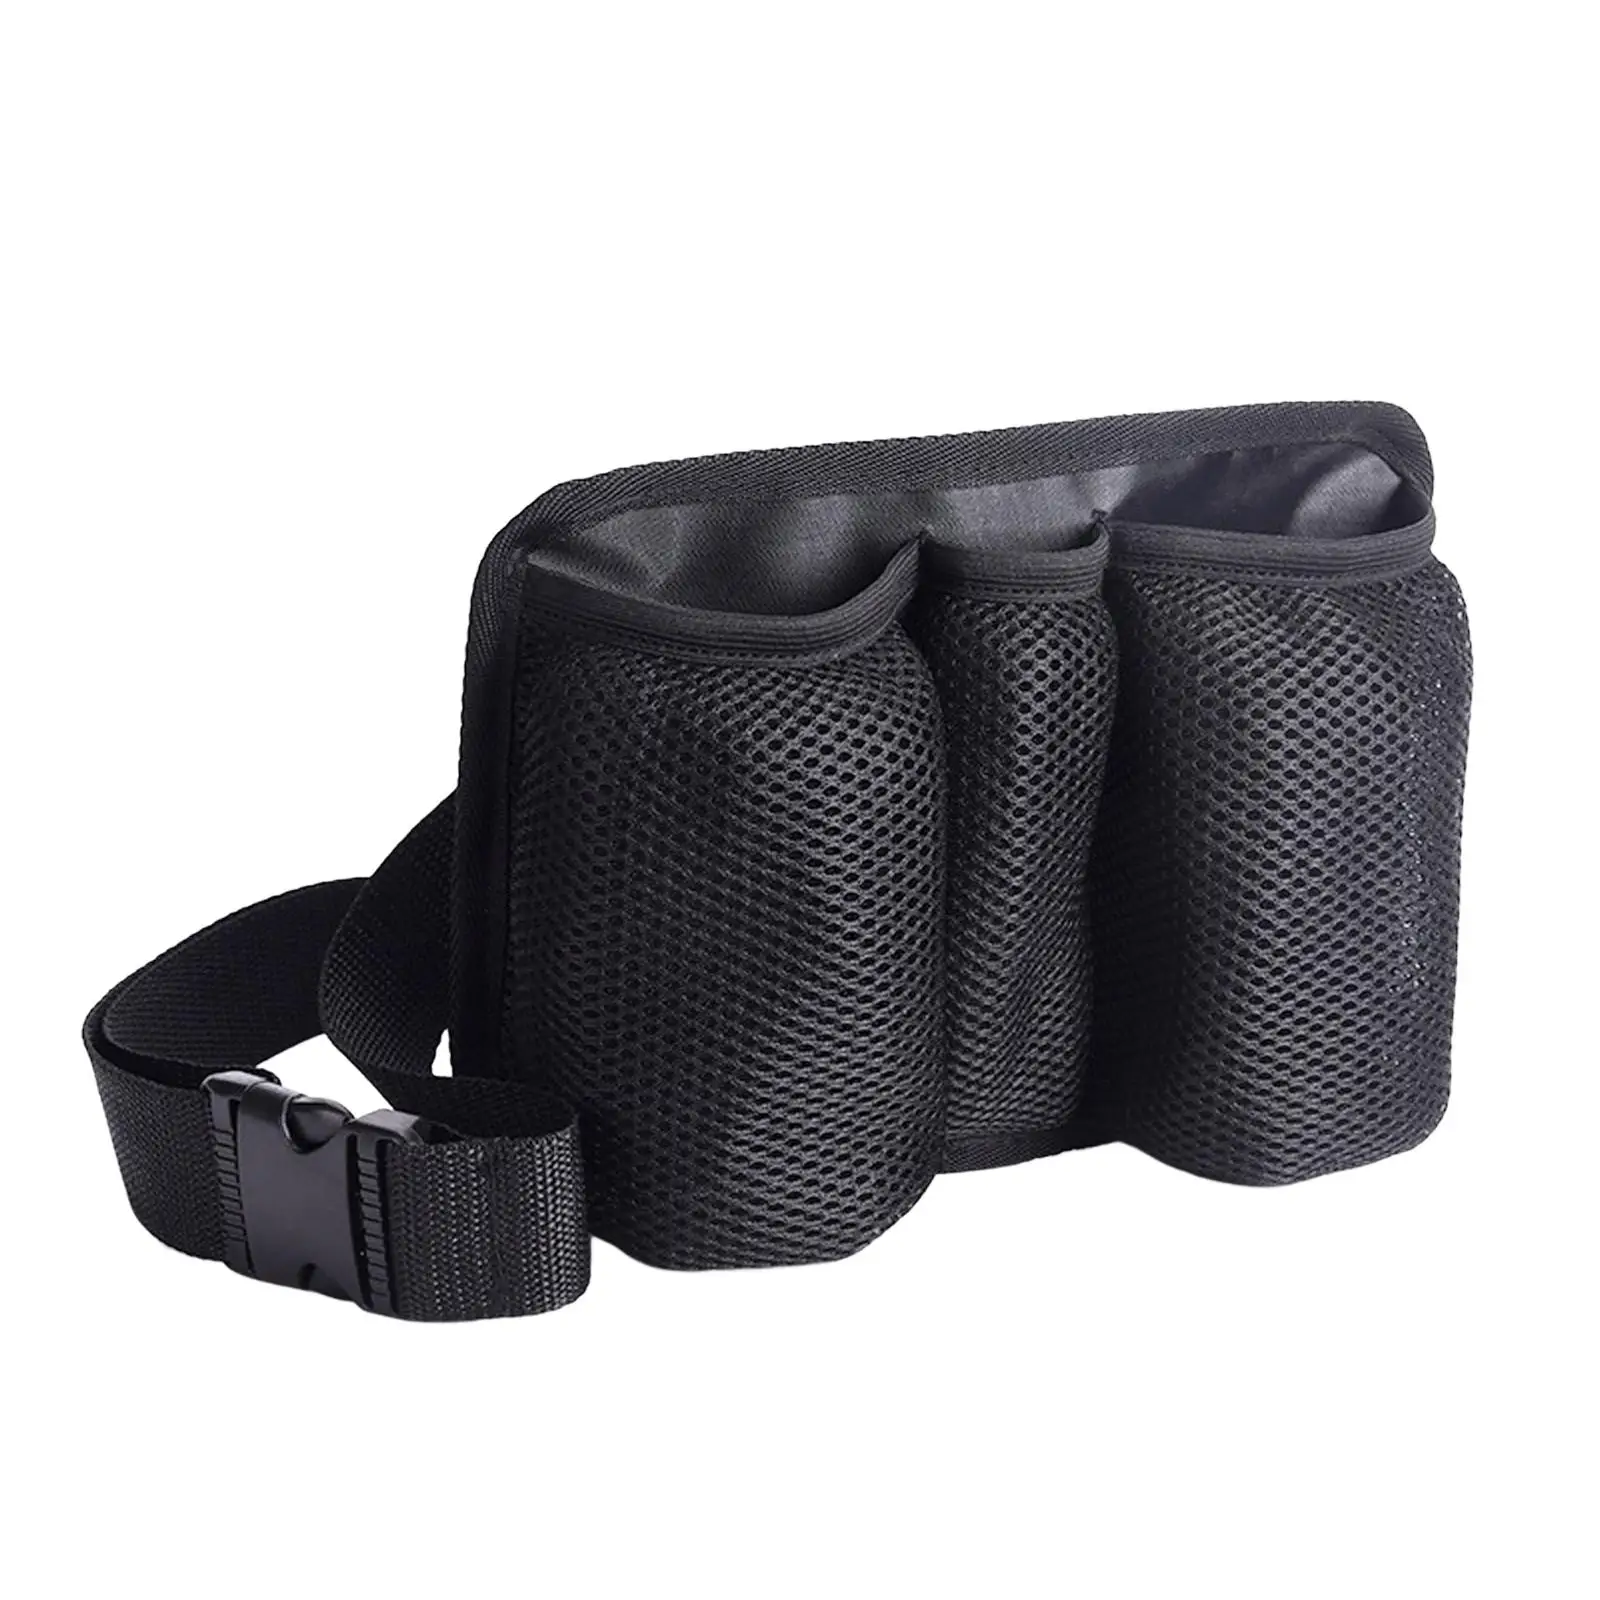 Portable Tool Pouch Storage Case Organizer Waist Case Repair Wrench Cleaning Tool for Gardening Tool Electrician Waiter Cleaner